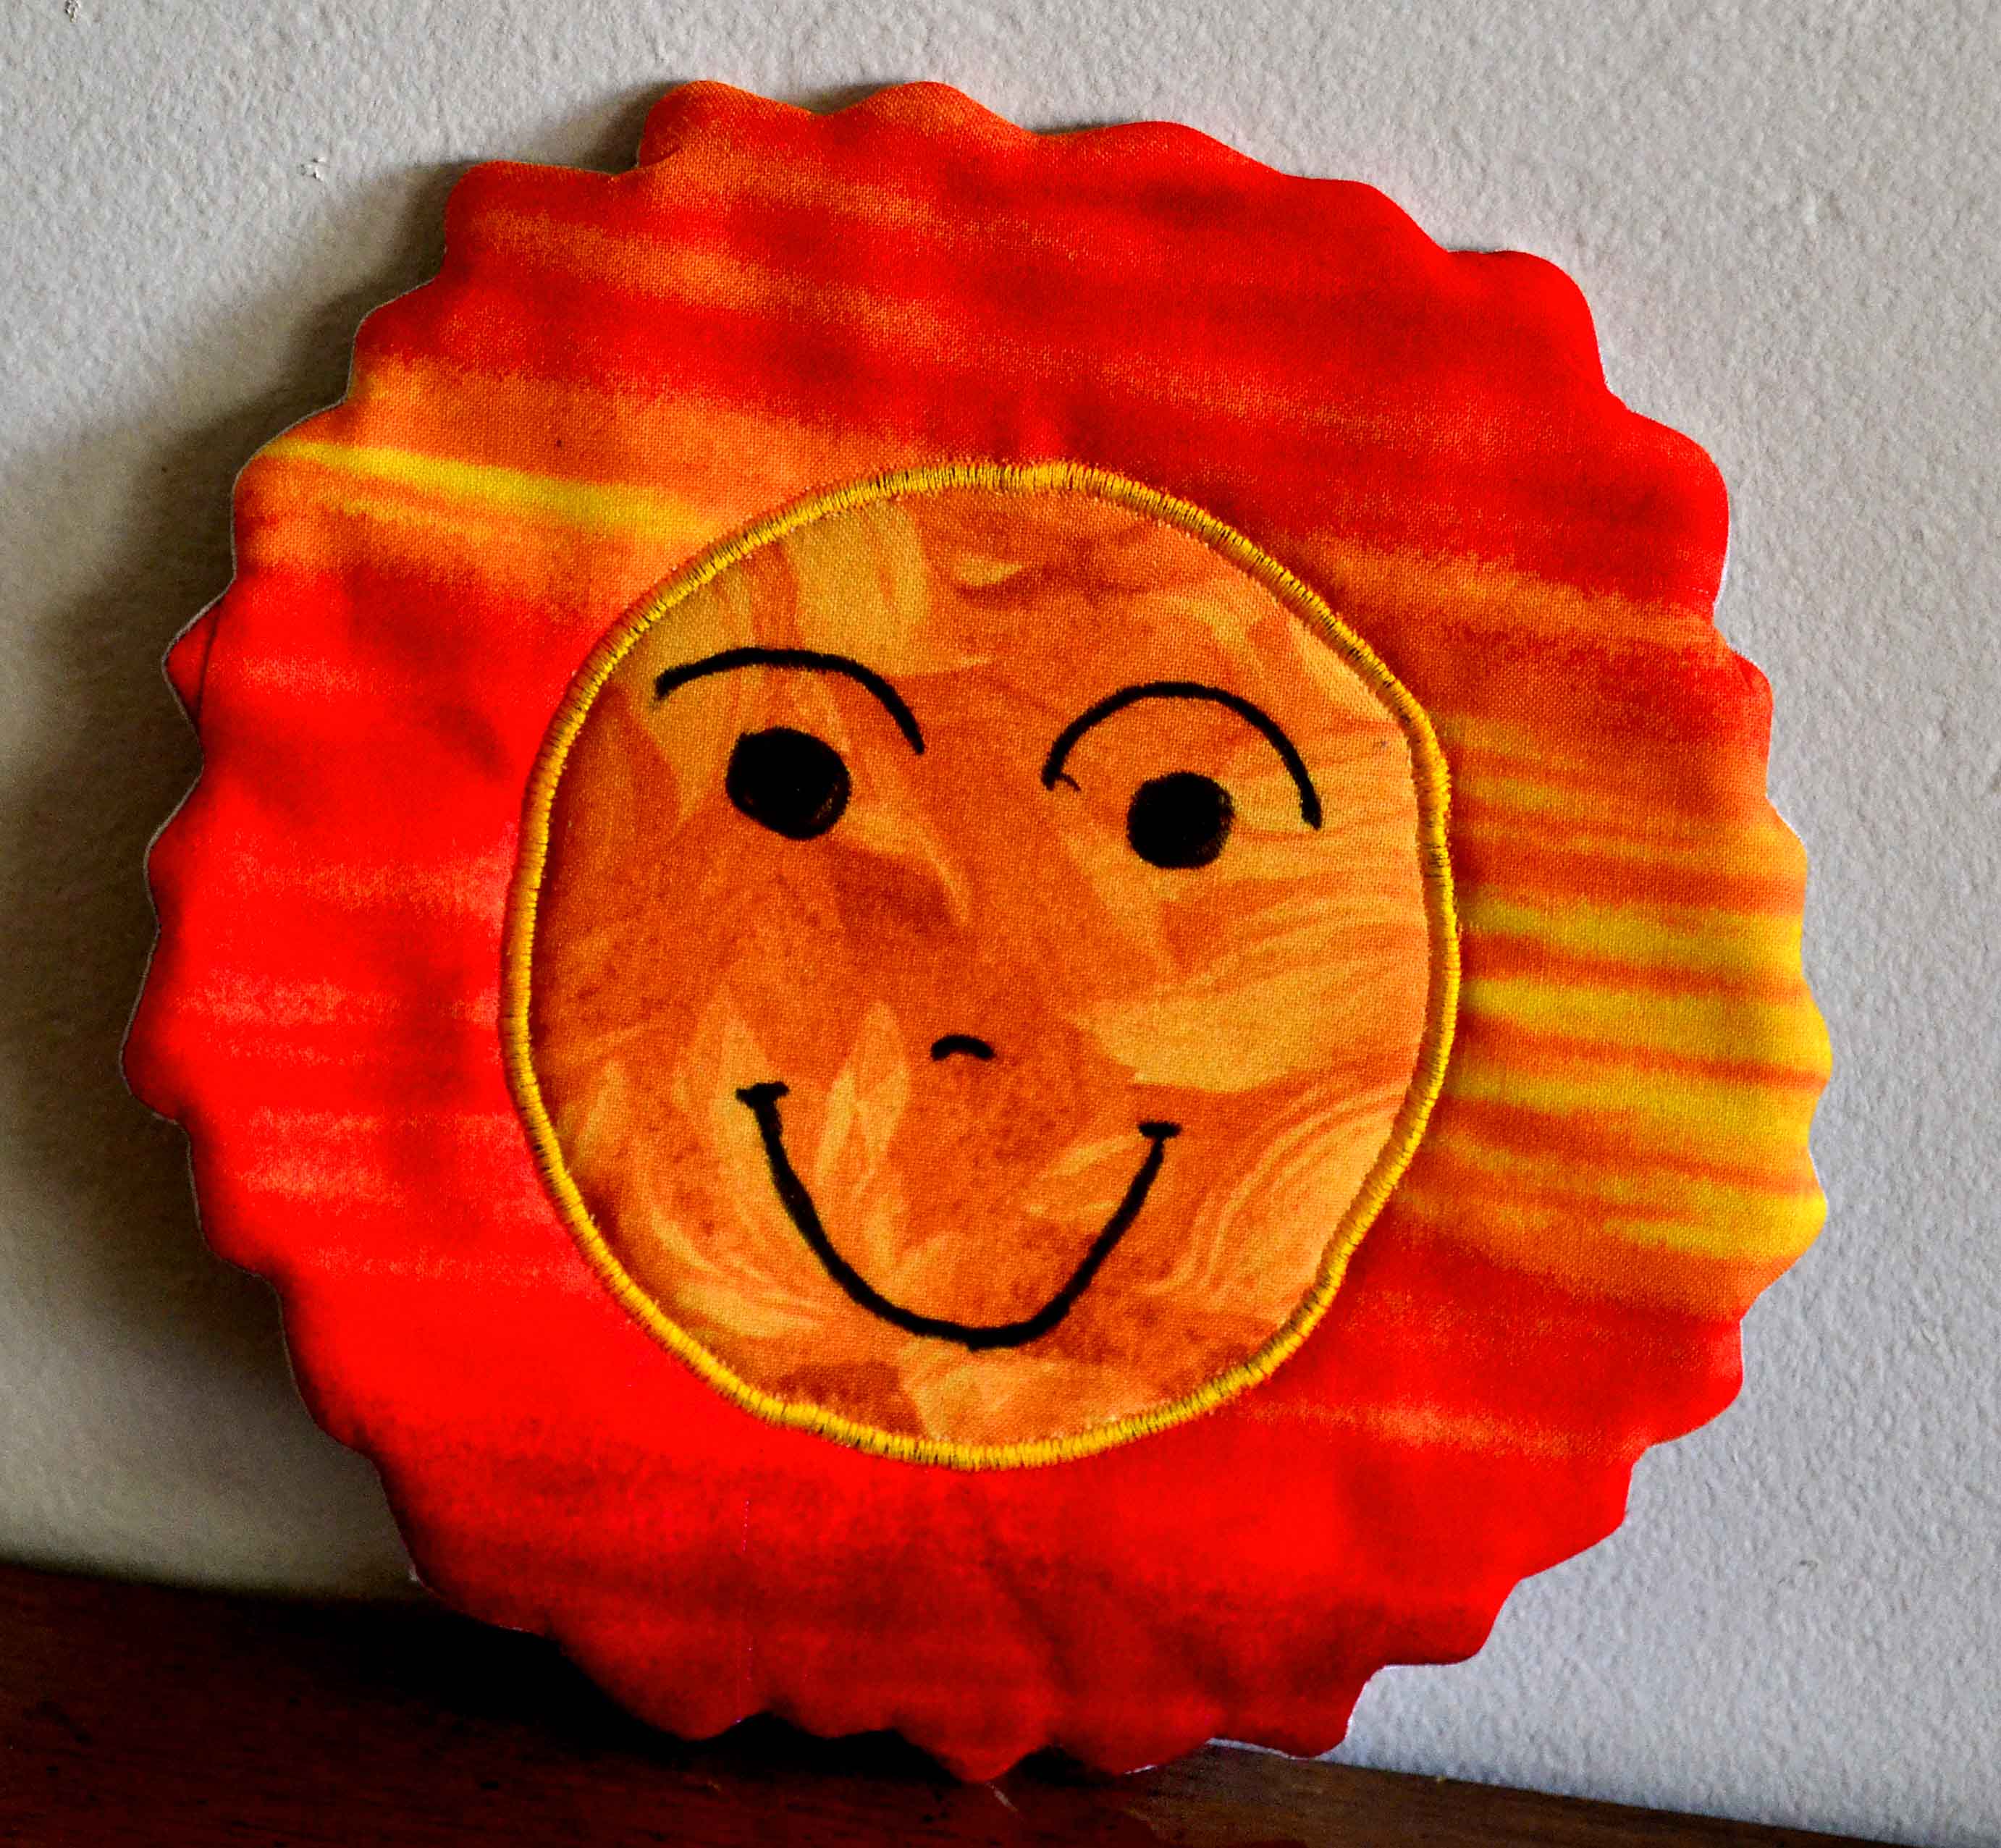 Fabric sun with a smiling face shaped potholder